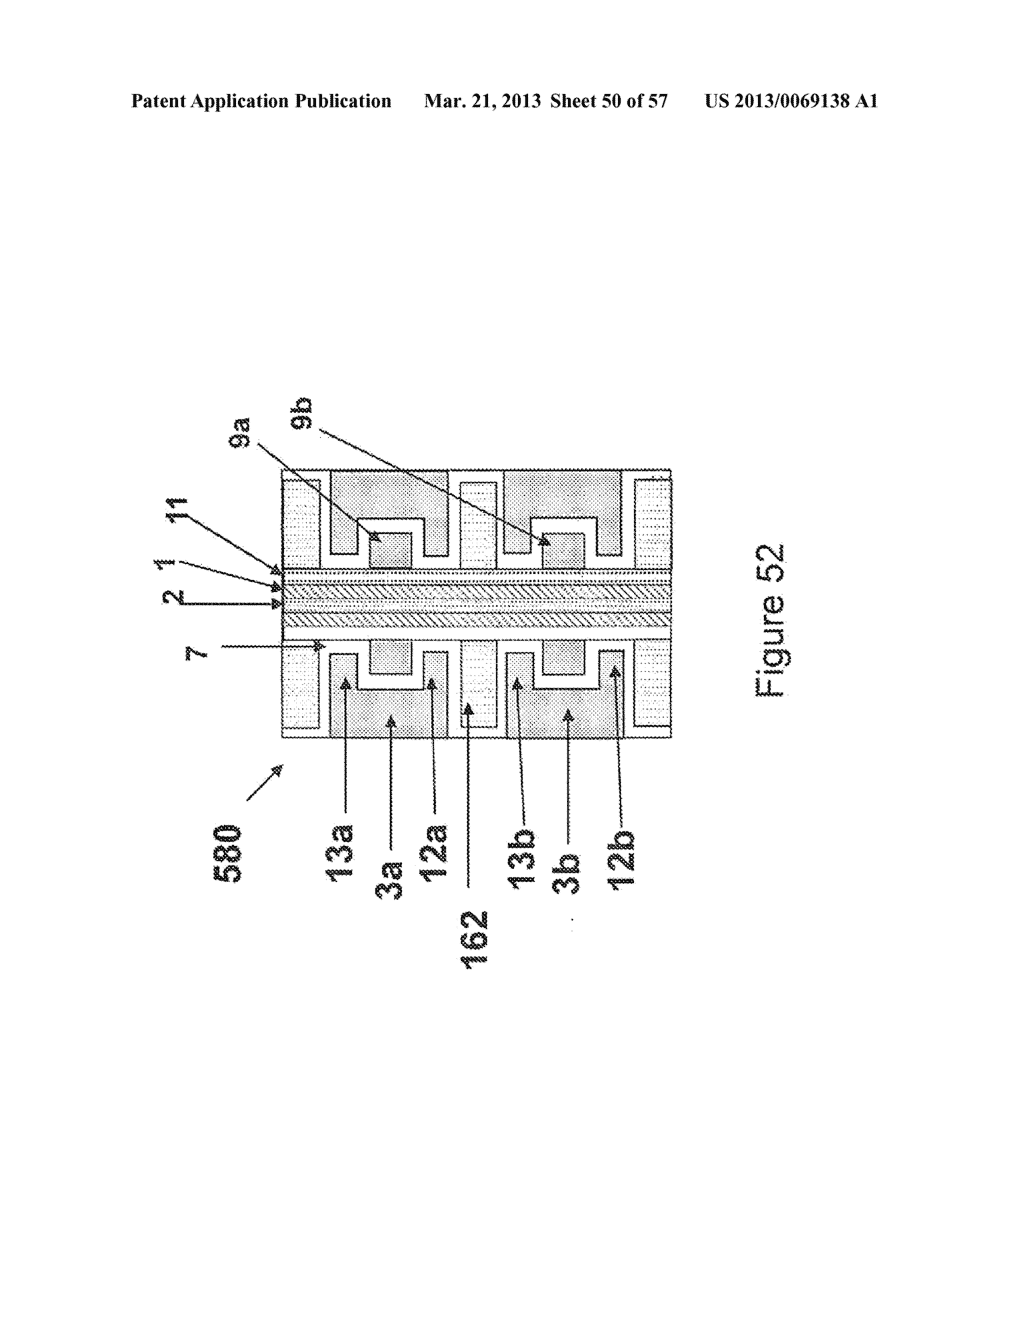 ULTRAHIGH DENSITY VERTICAL NAND MEMORY DEVICE AND METHOD OF MAKING THEREOF - diagram, schematic, and image 51